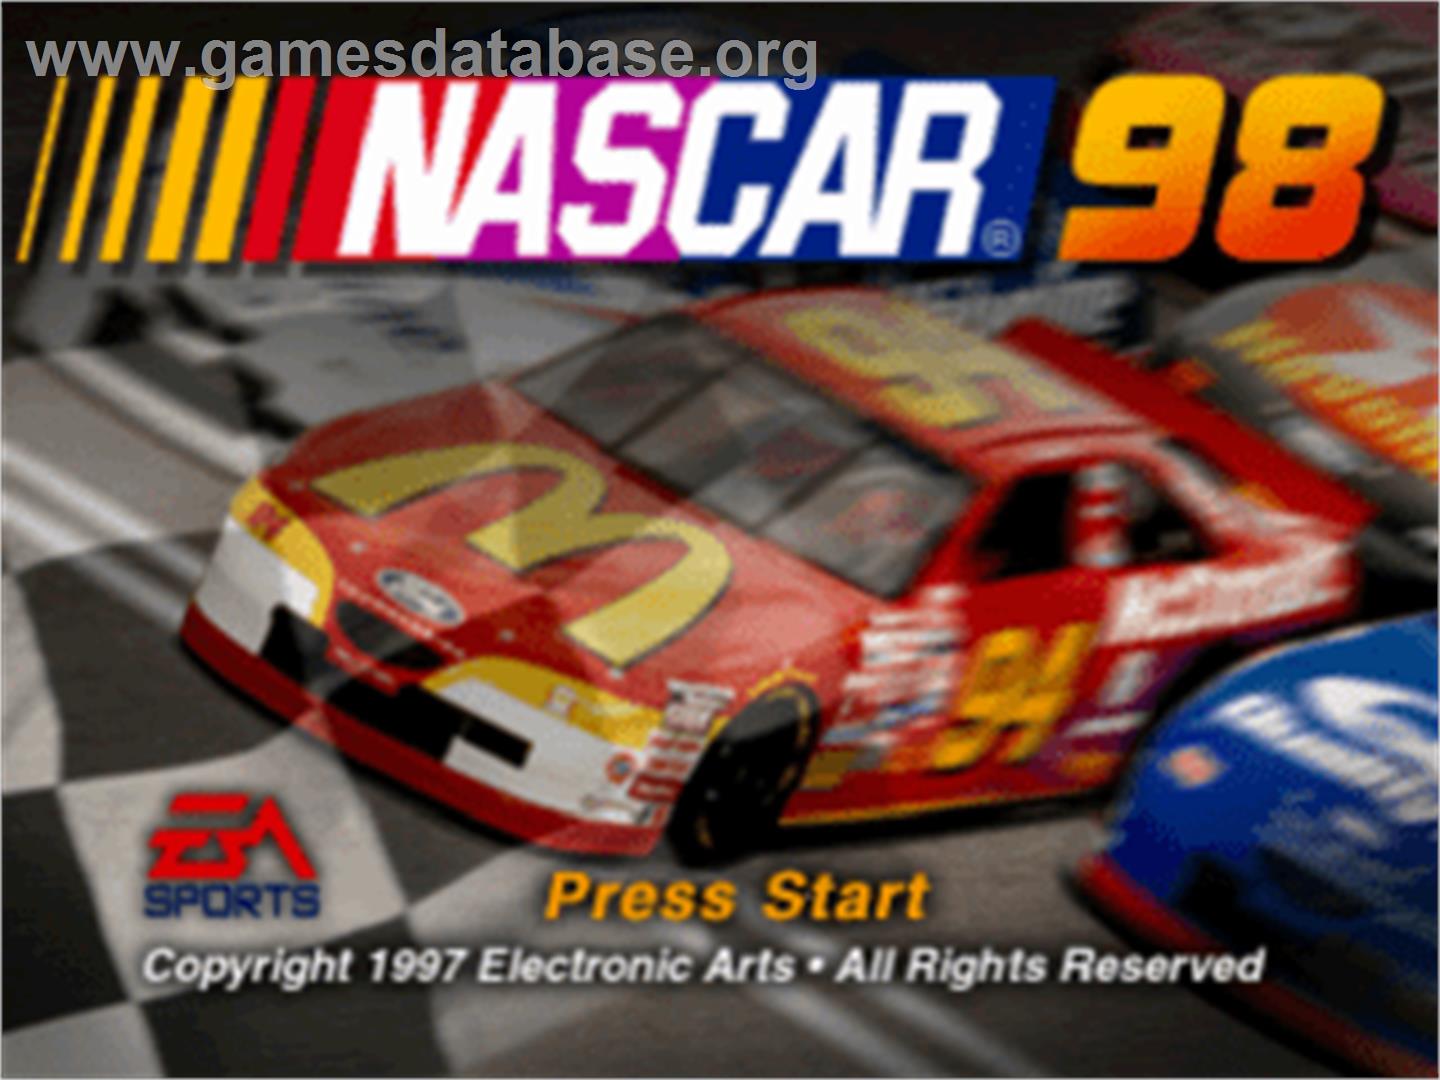 NASCAR 98 (Collector's Edition) - Sony Playstation - Artwork - Title Screen